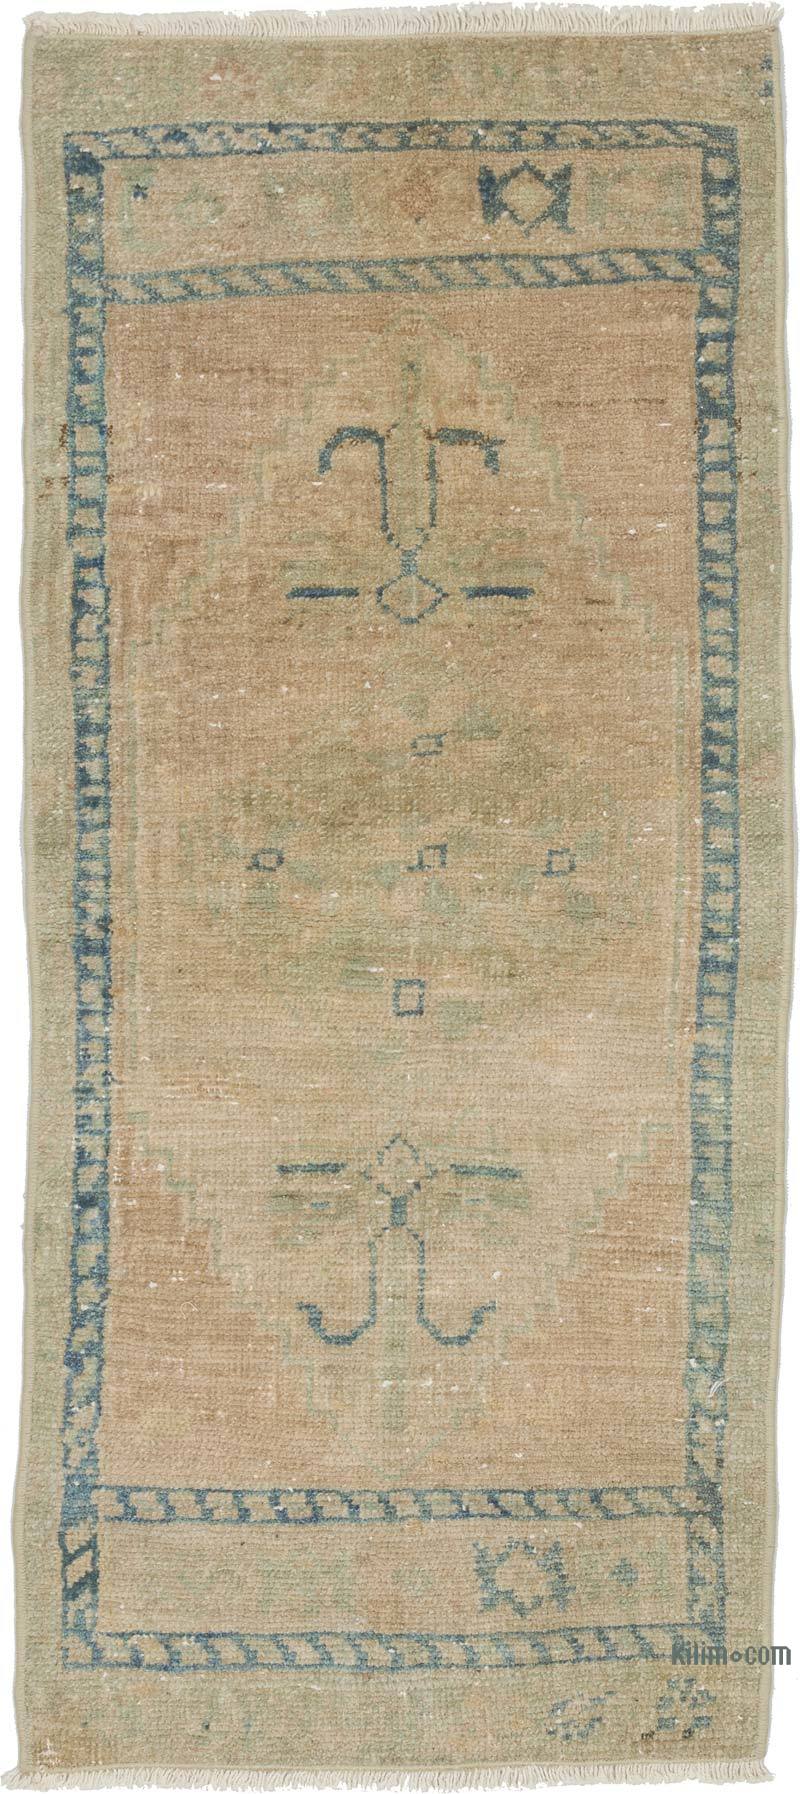 Vintage Turkish Hand-Knotted Rug - 1' 5" x 3' 1" (17 in. x 37 in.) - K0054625